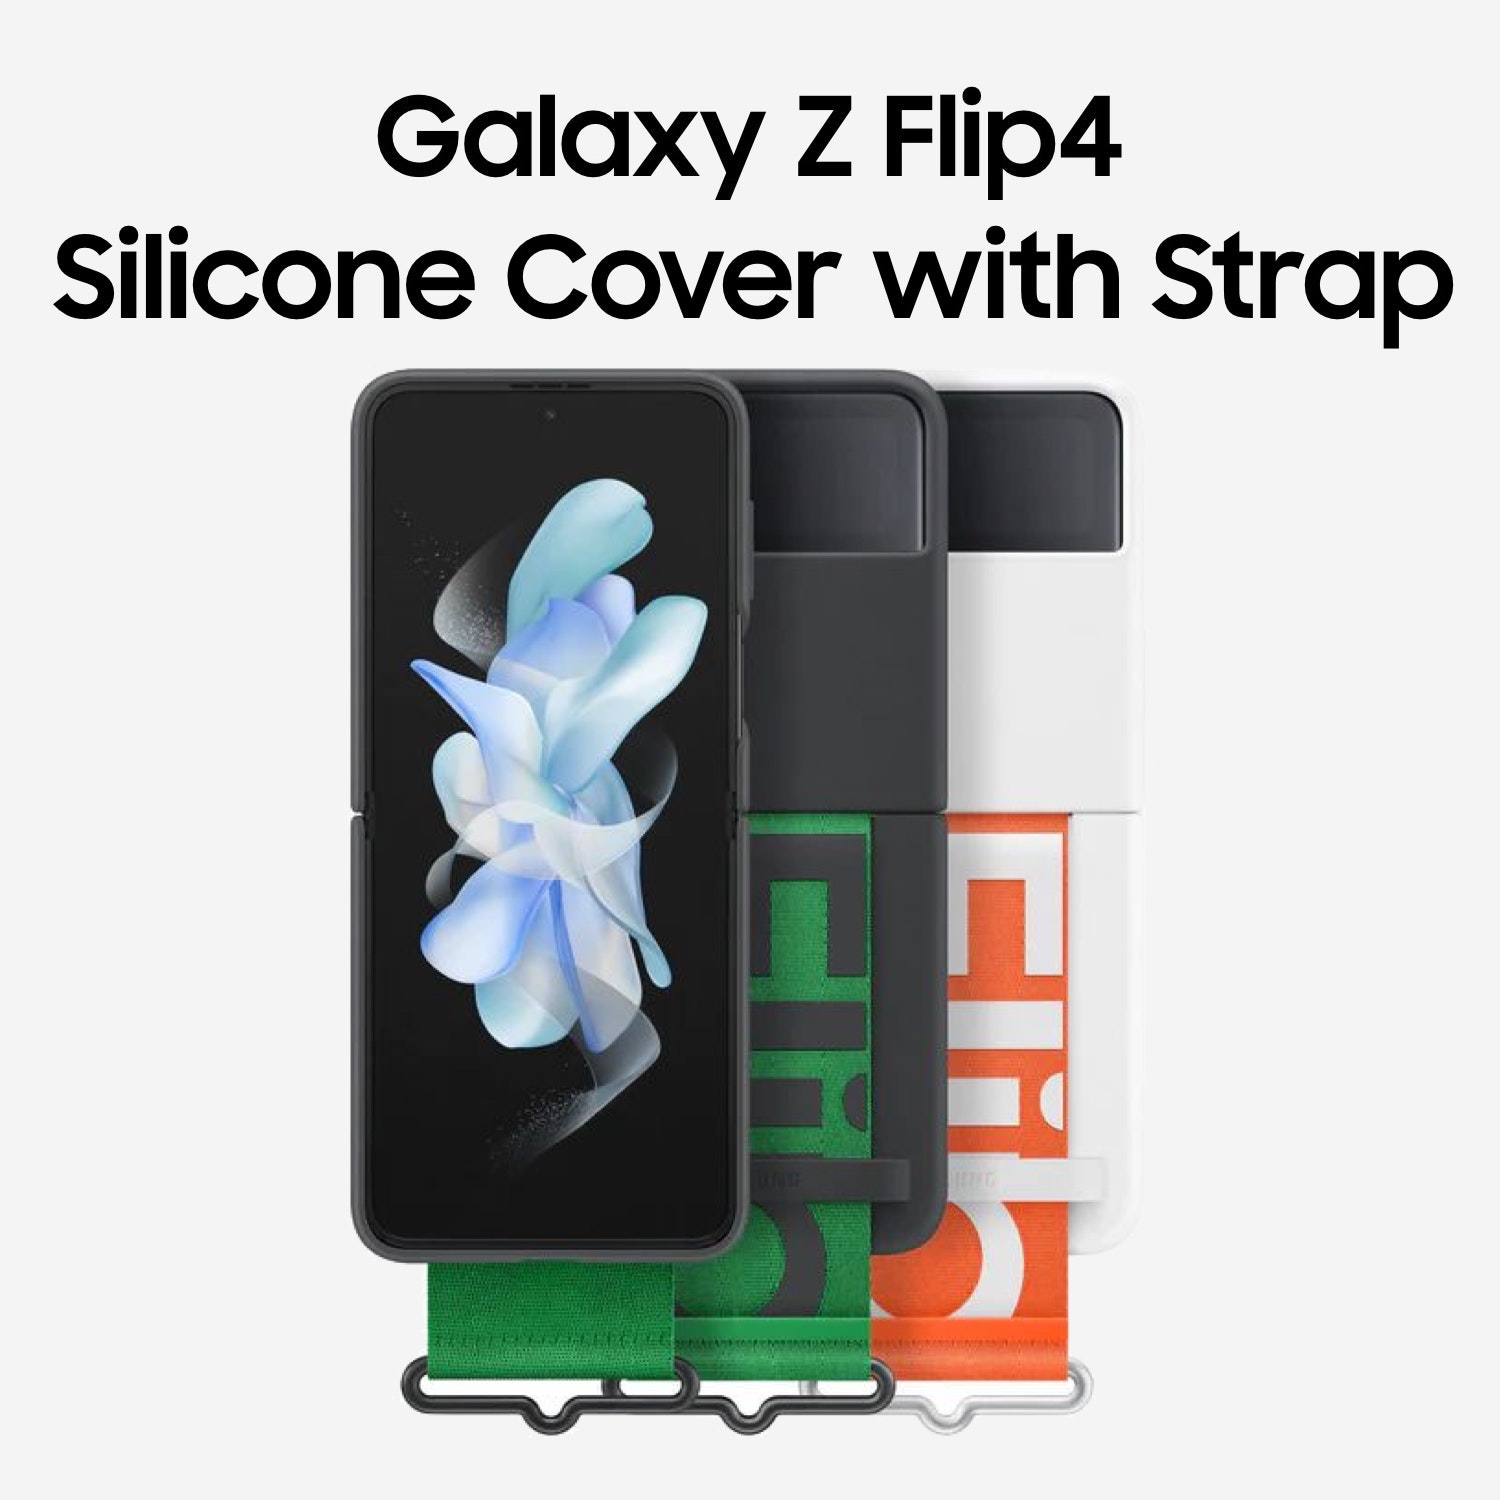 Galaxy Flip 4 Silicone Cover with Strap 純正ケース サムスン ギャラクシ ー 折りたたみ